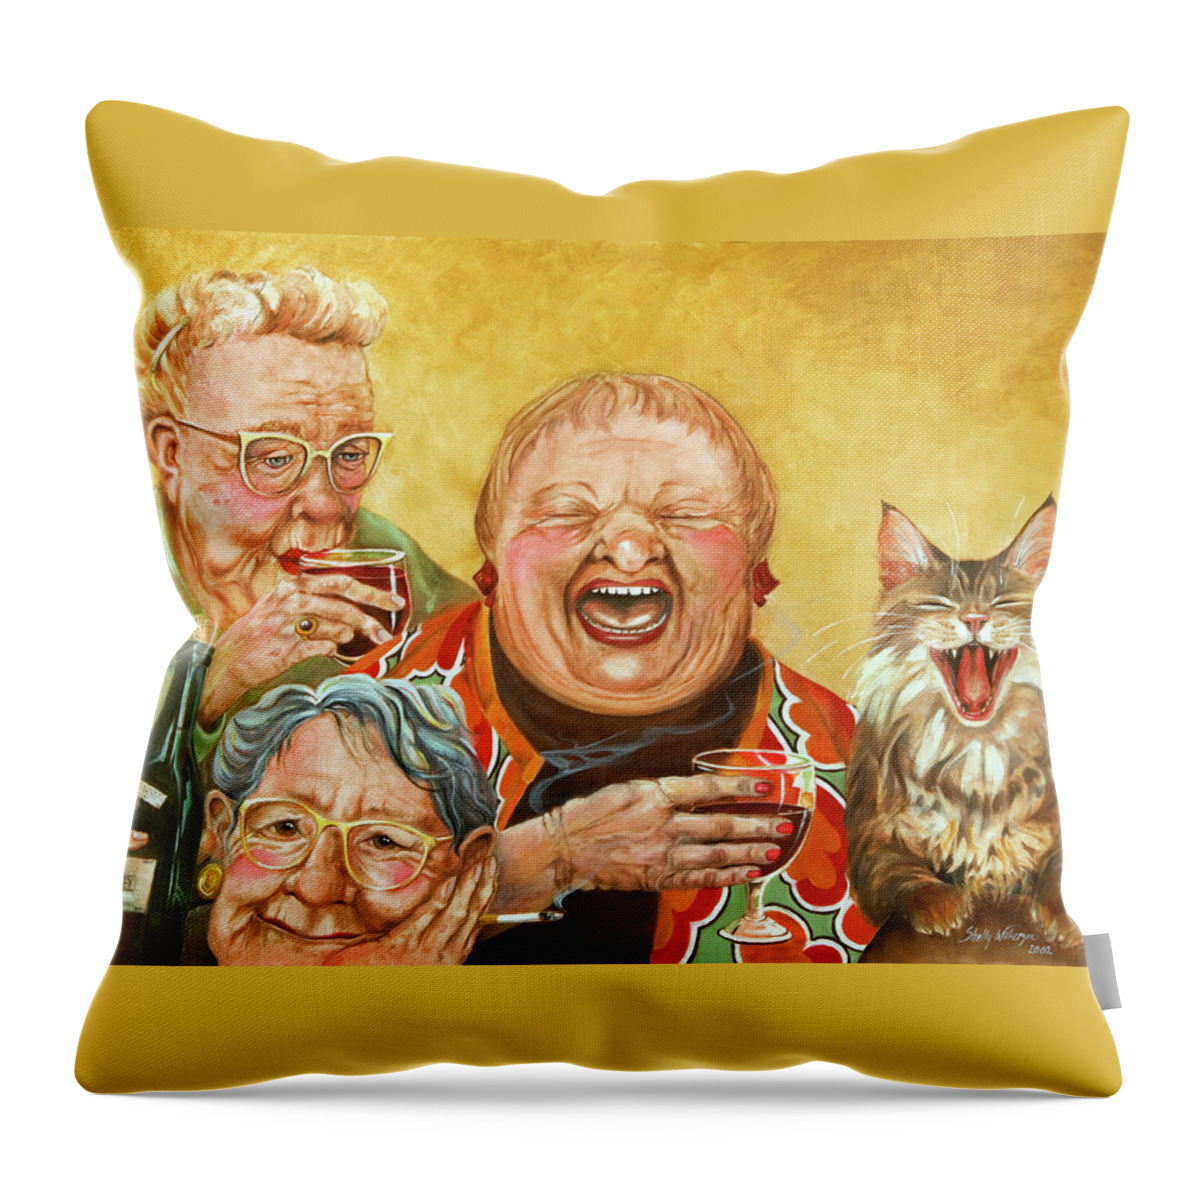 Whimsical Throw Pillow featuring the painting Miriam's Tea Party by Shelly Wilkerson